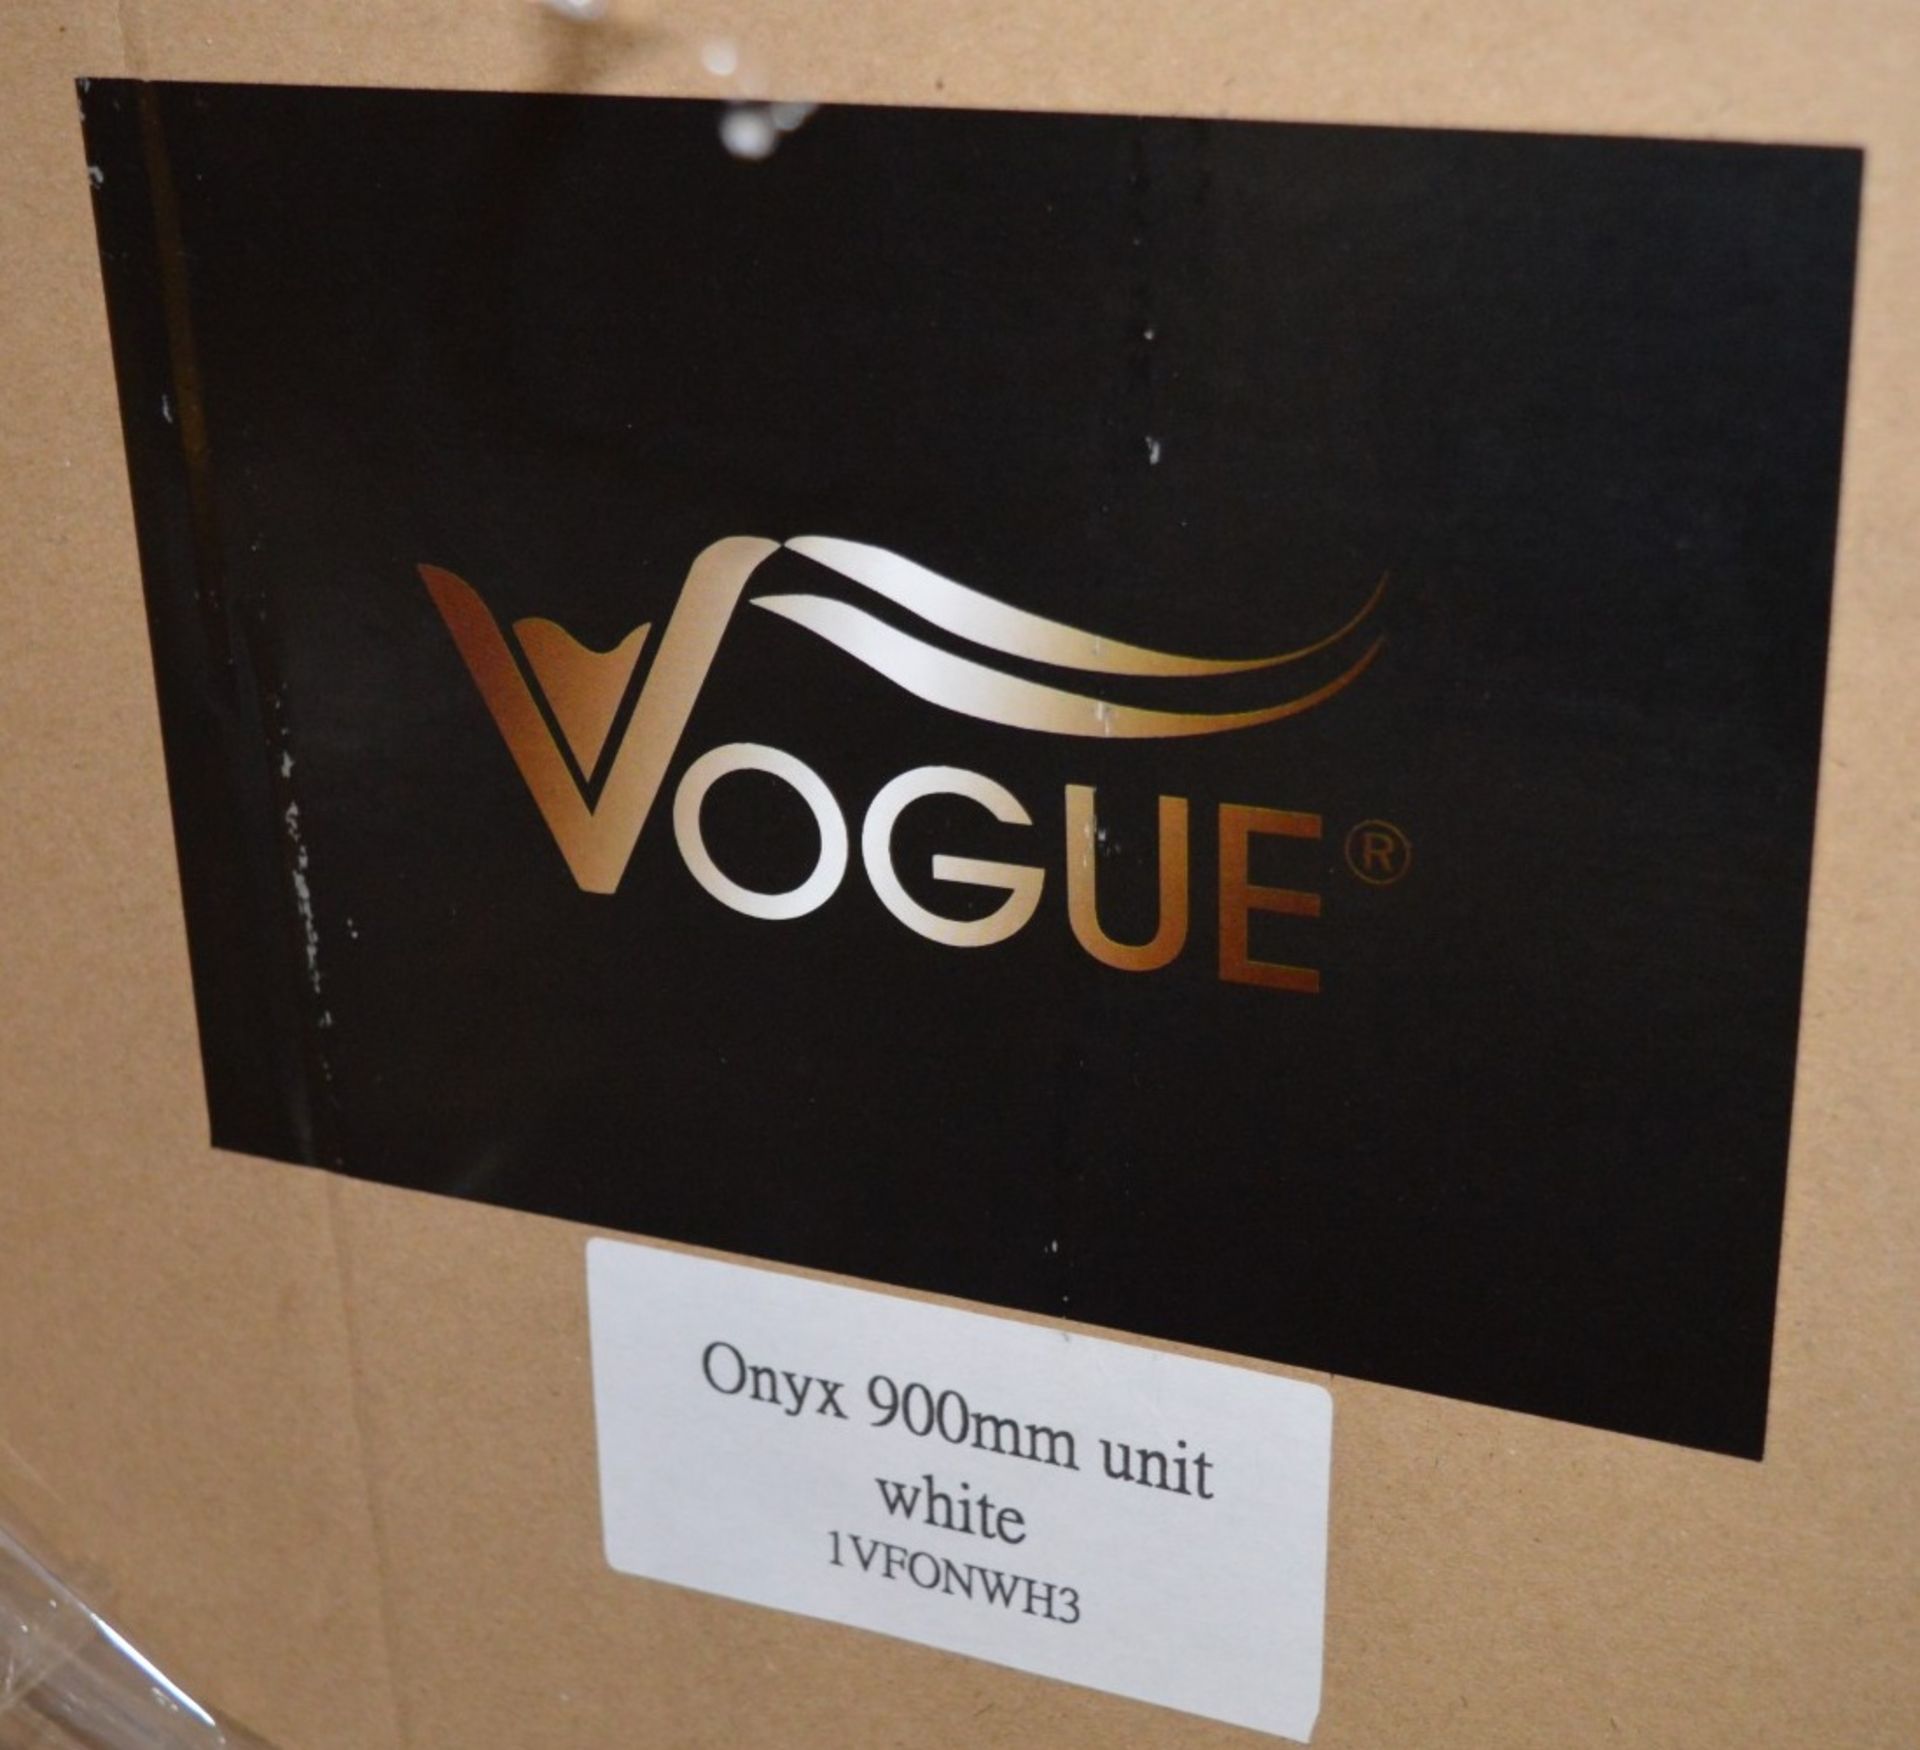 1 x Vogue Onyx White Gloss 900mm Bathroom Vanity Unit With Wash Basin - Vinyl Wrap Coating for - Image 2 of 2